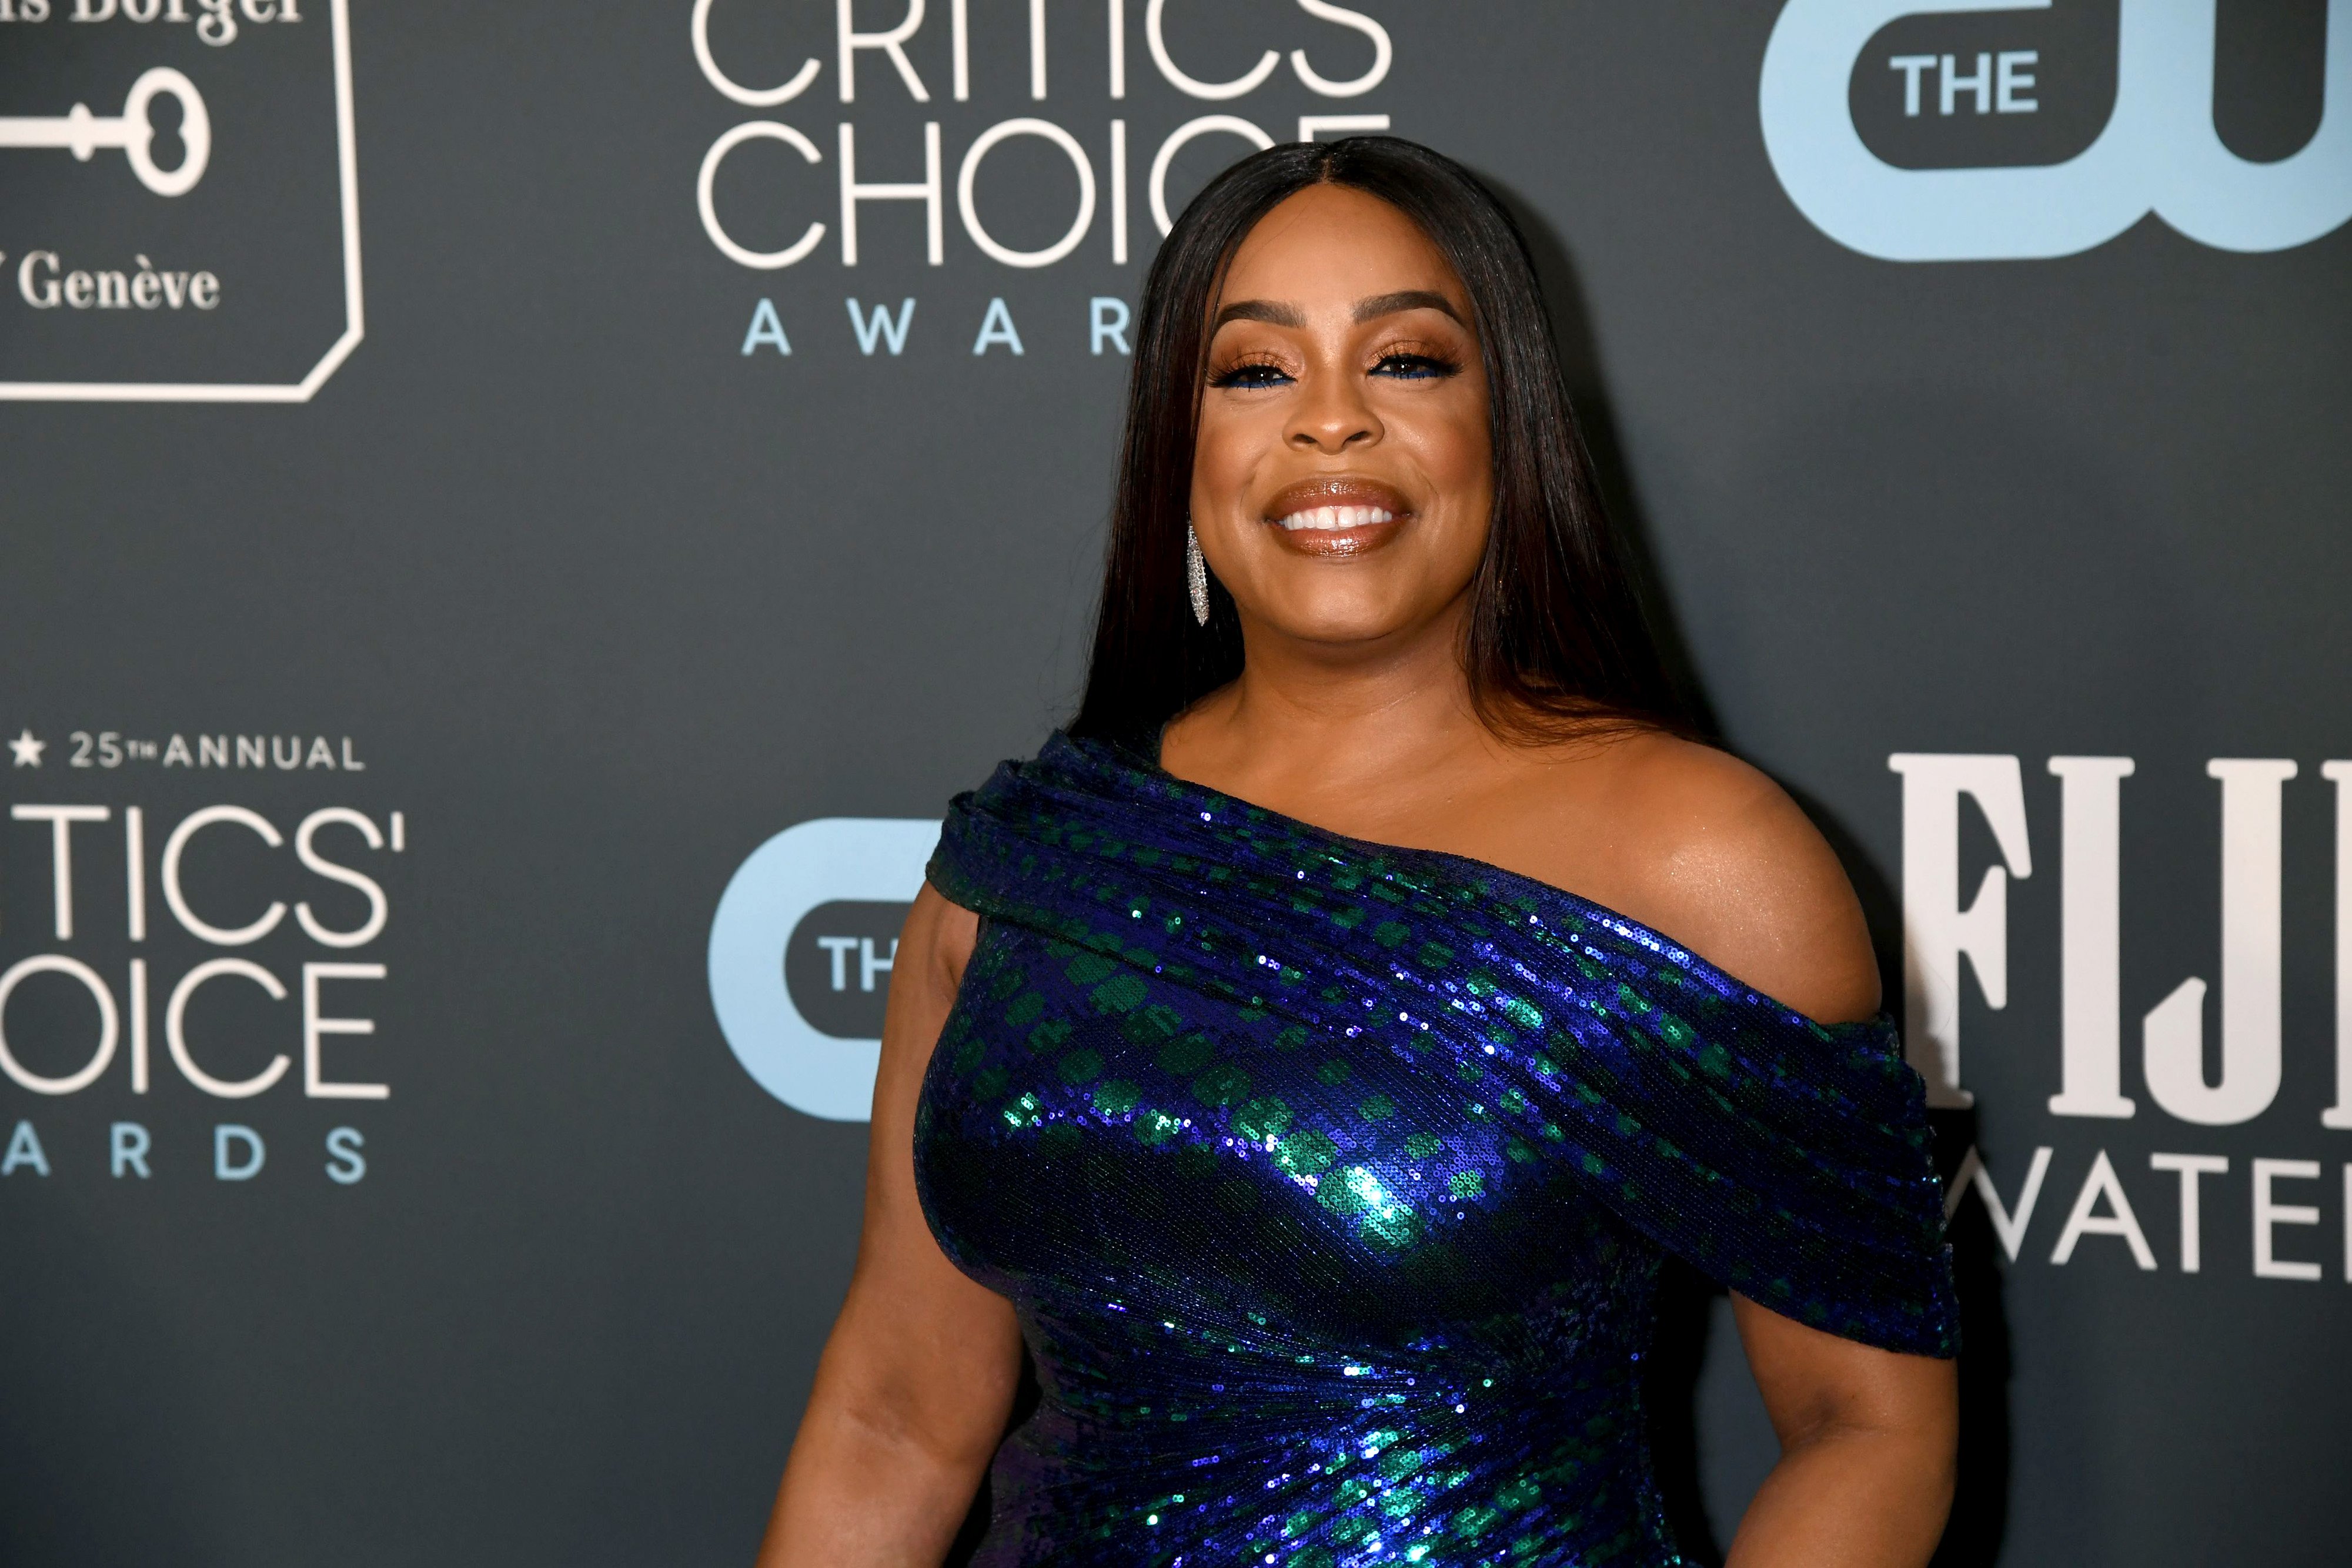 Niecy Nash at the 25th Annual Critics' Choice Awards at Barker Hangar on January 12, 2020 in Santa Monica, California.| Source: Getty Images